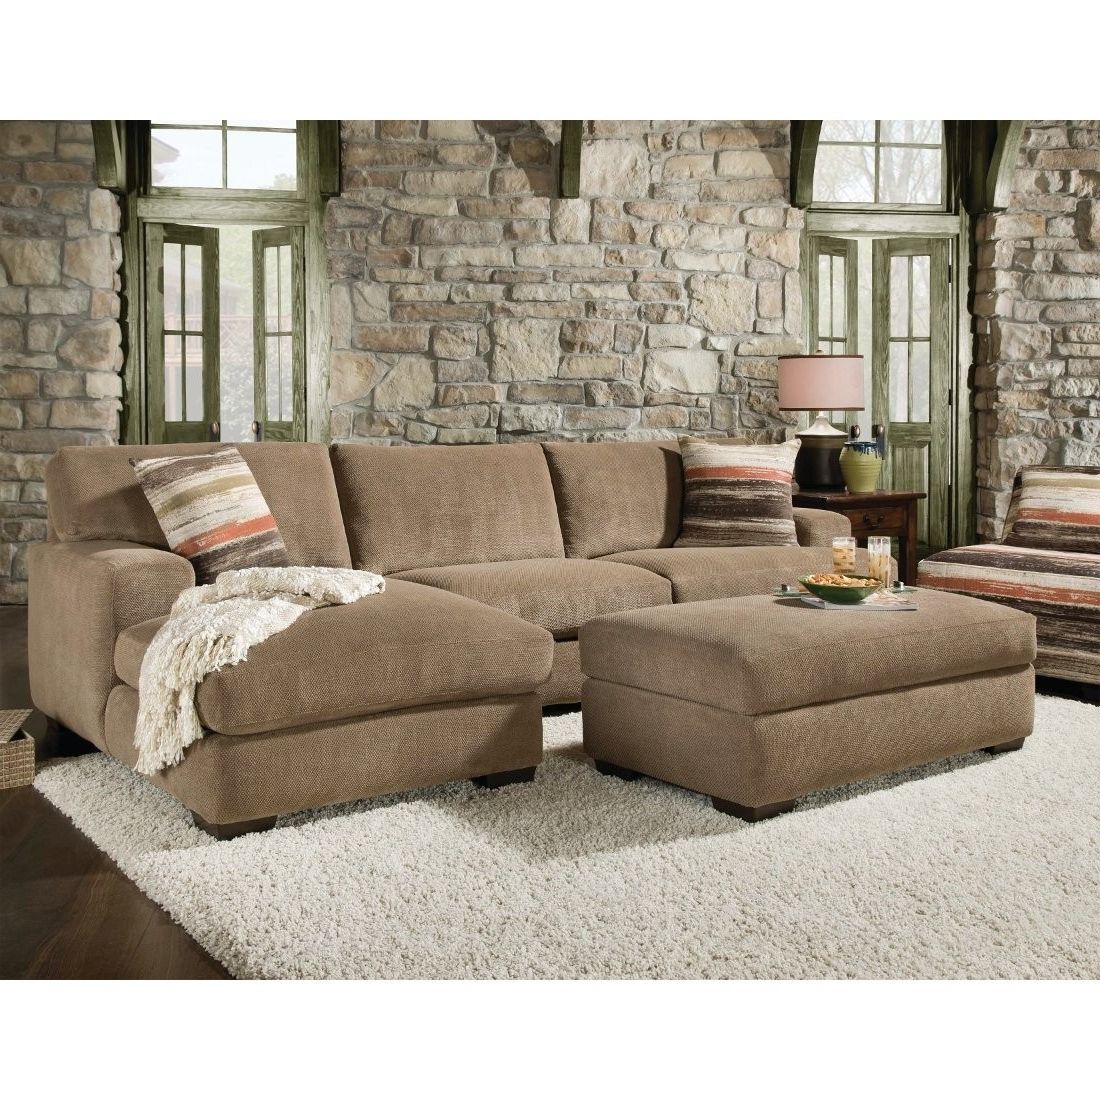 Chaise Sectional Sofas For Newest Beautiful Sectional Sofa With Chaise And Ottoman Pictures (View 4 of 15)